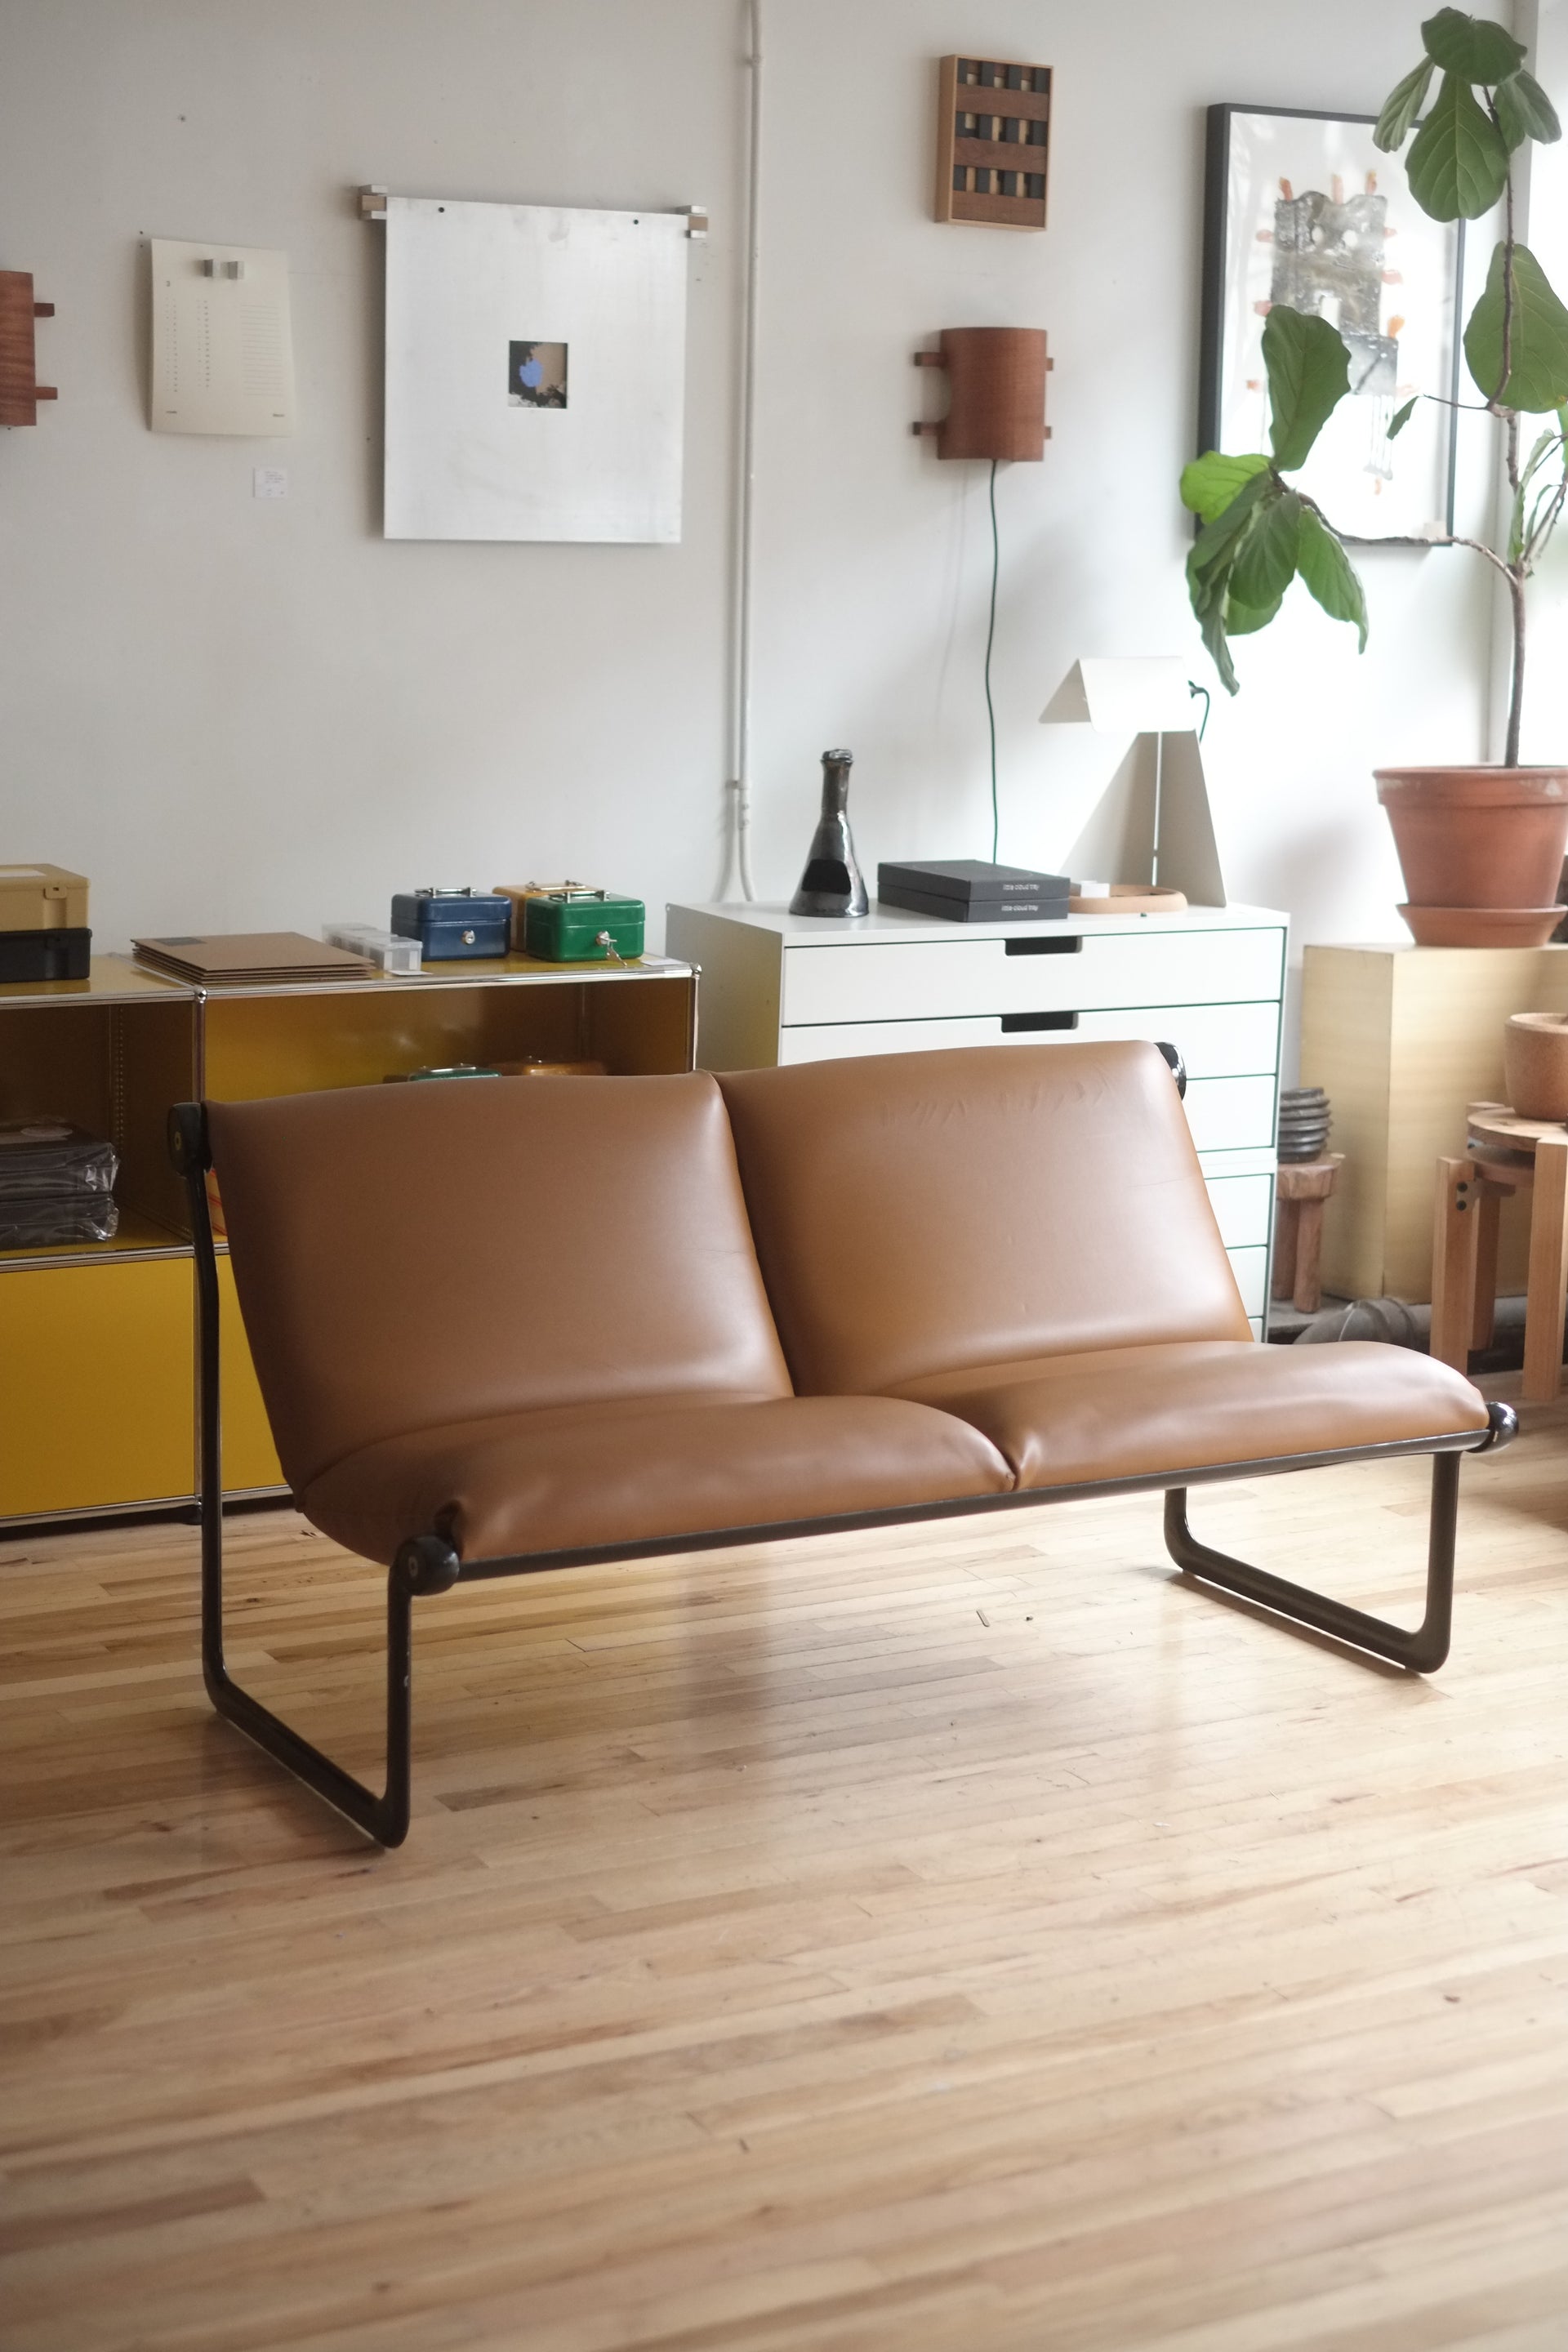 Knoll Aluminum Sling Sofa by Bruce Hannah and Andrew Morrison in Leather